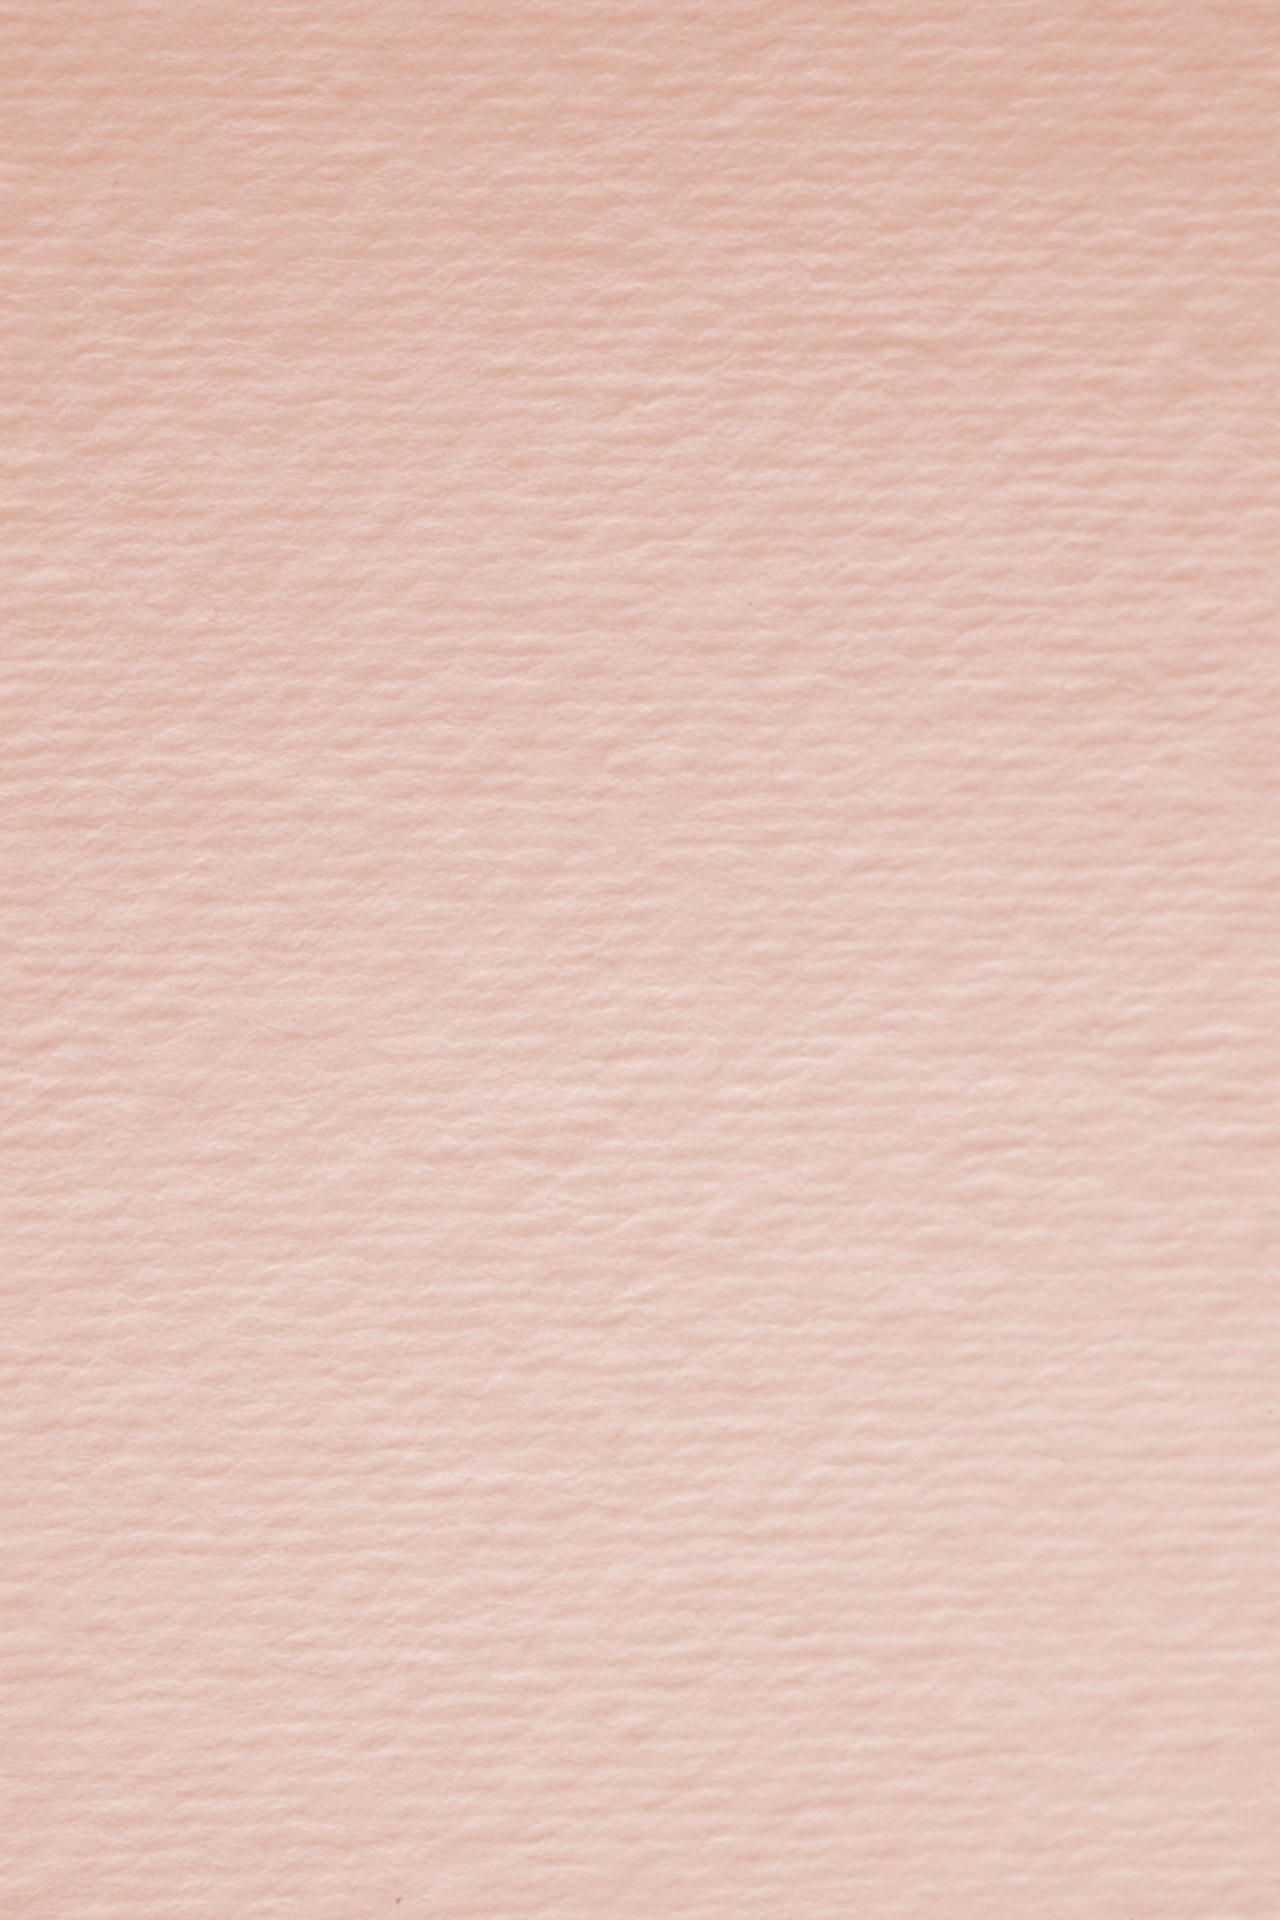 Light Pink Paper Texture. Stock Photo, Picture and Royalty Free Image.  Image 55032821.